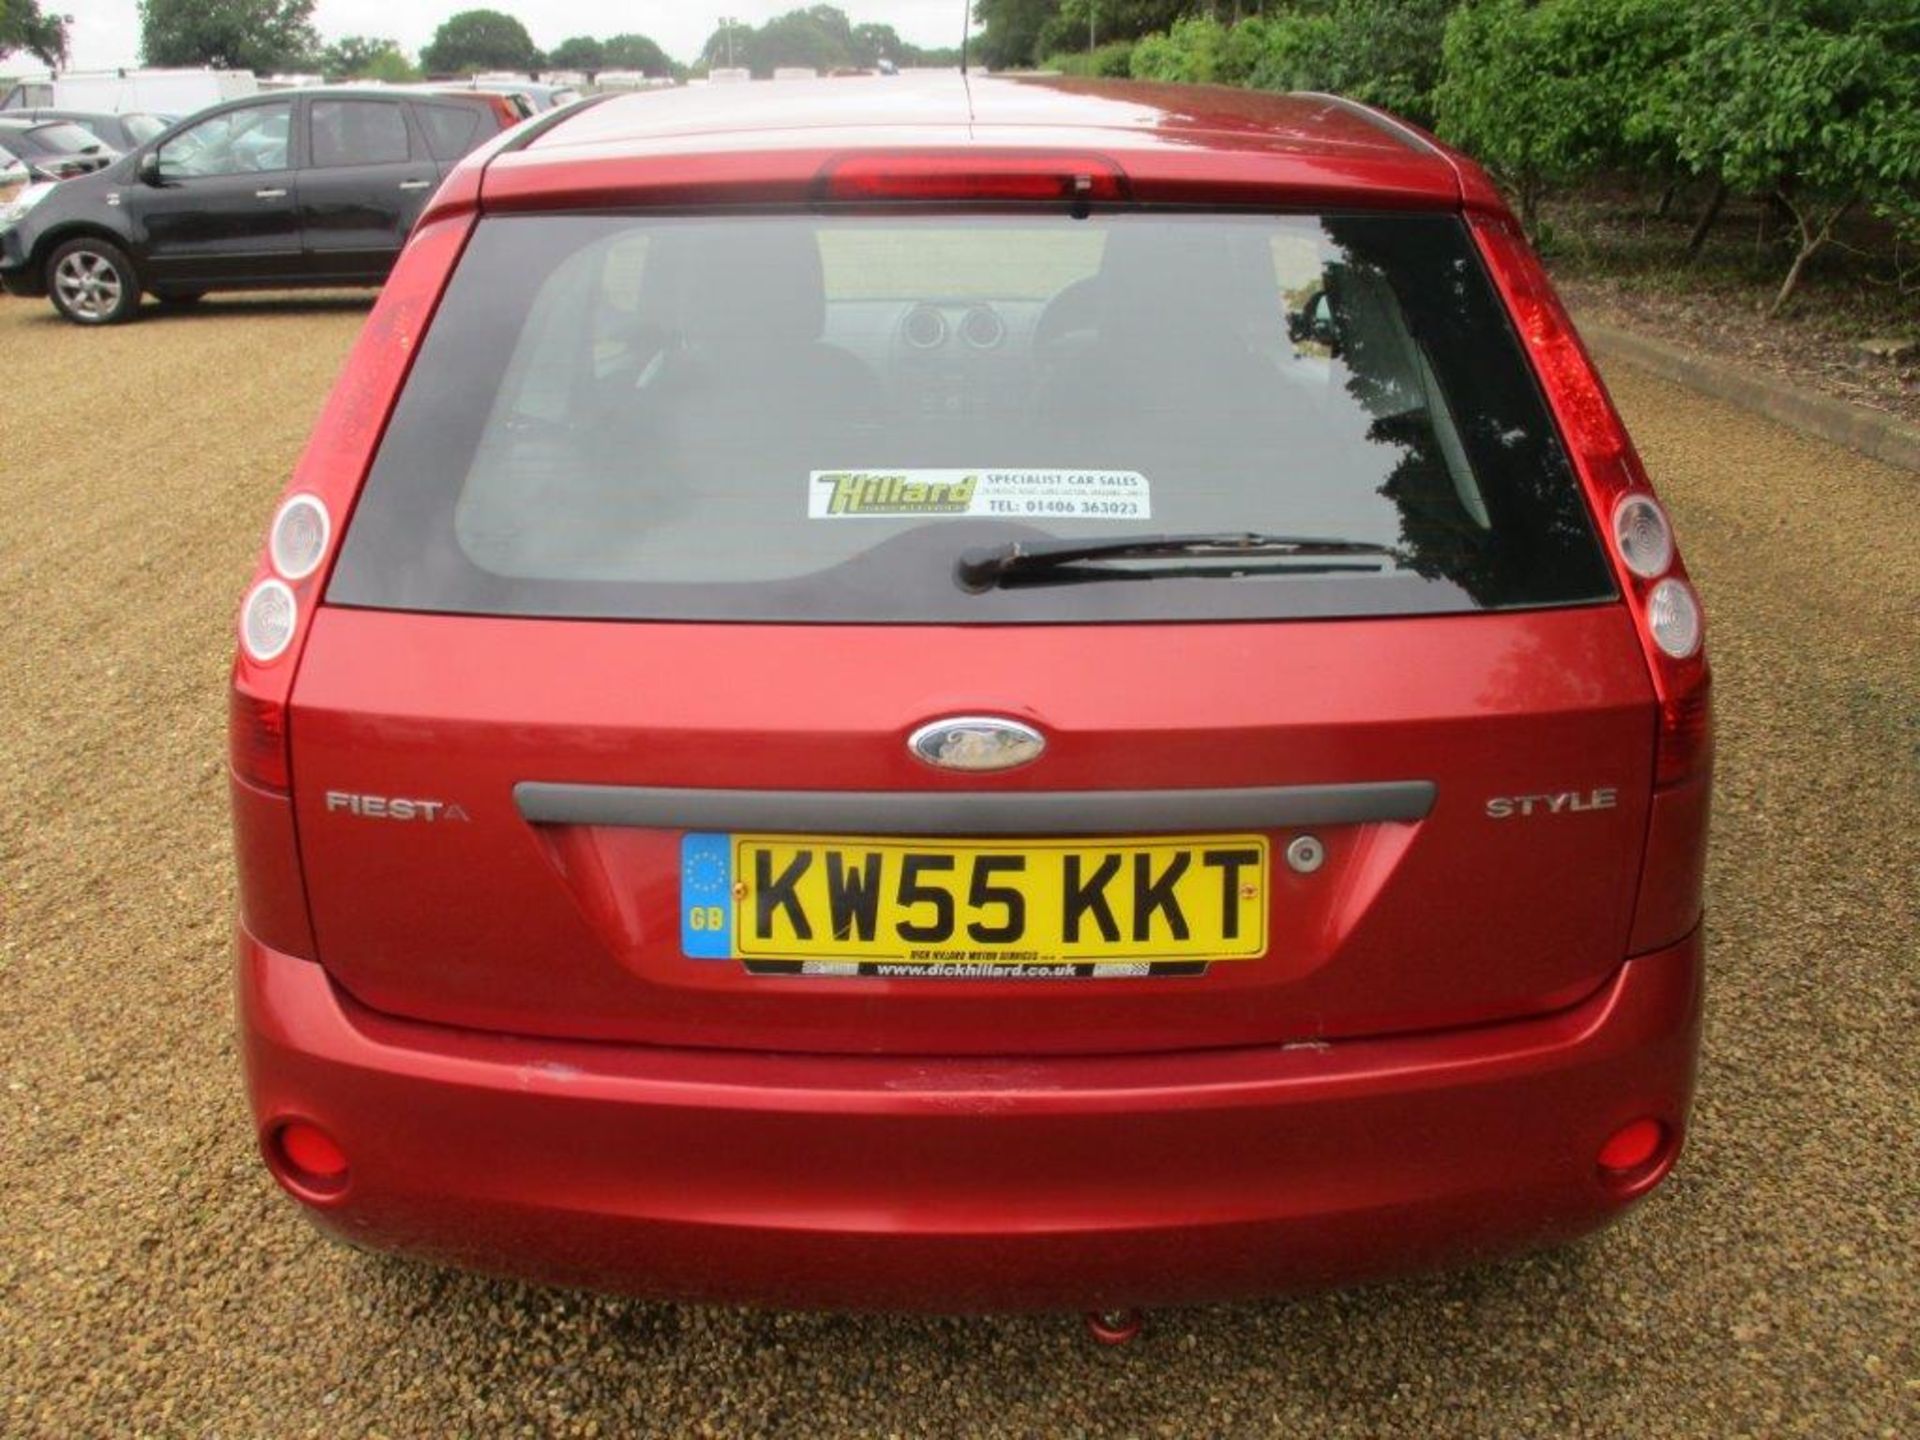 06 55 Ford Fiesta Style 3dr - Image 2 of 18